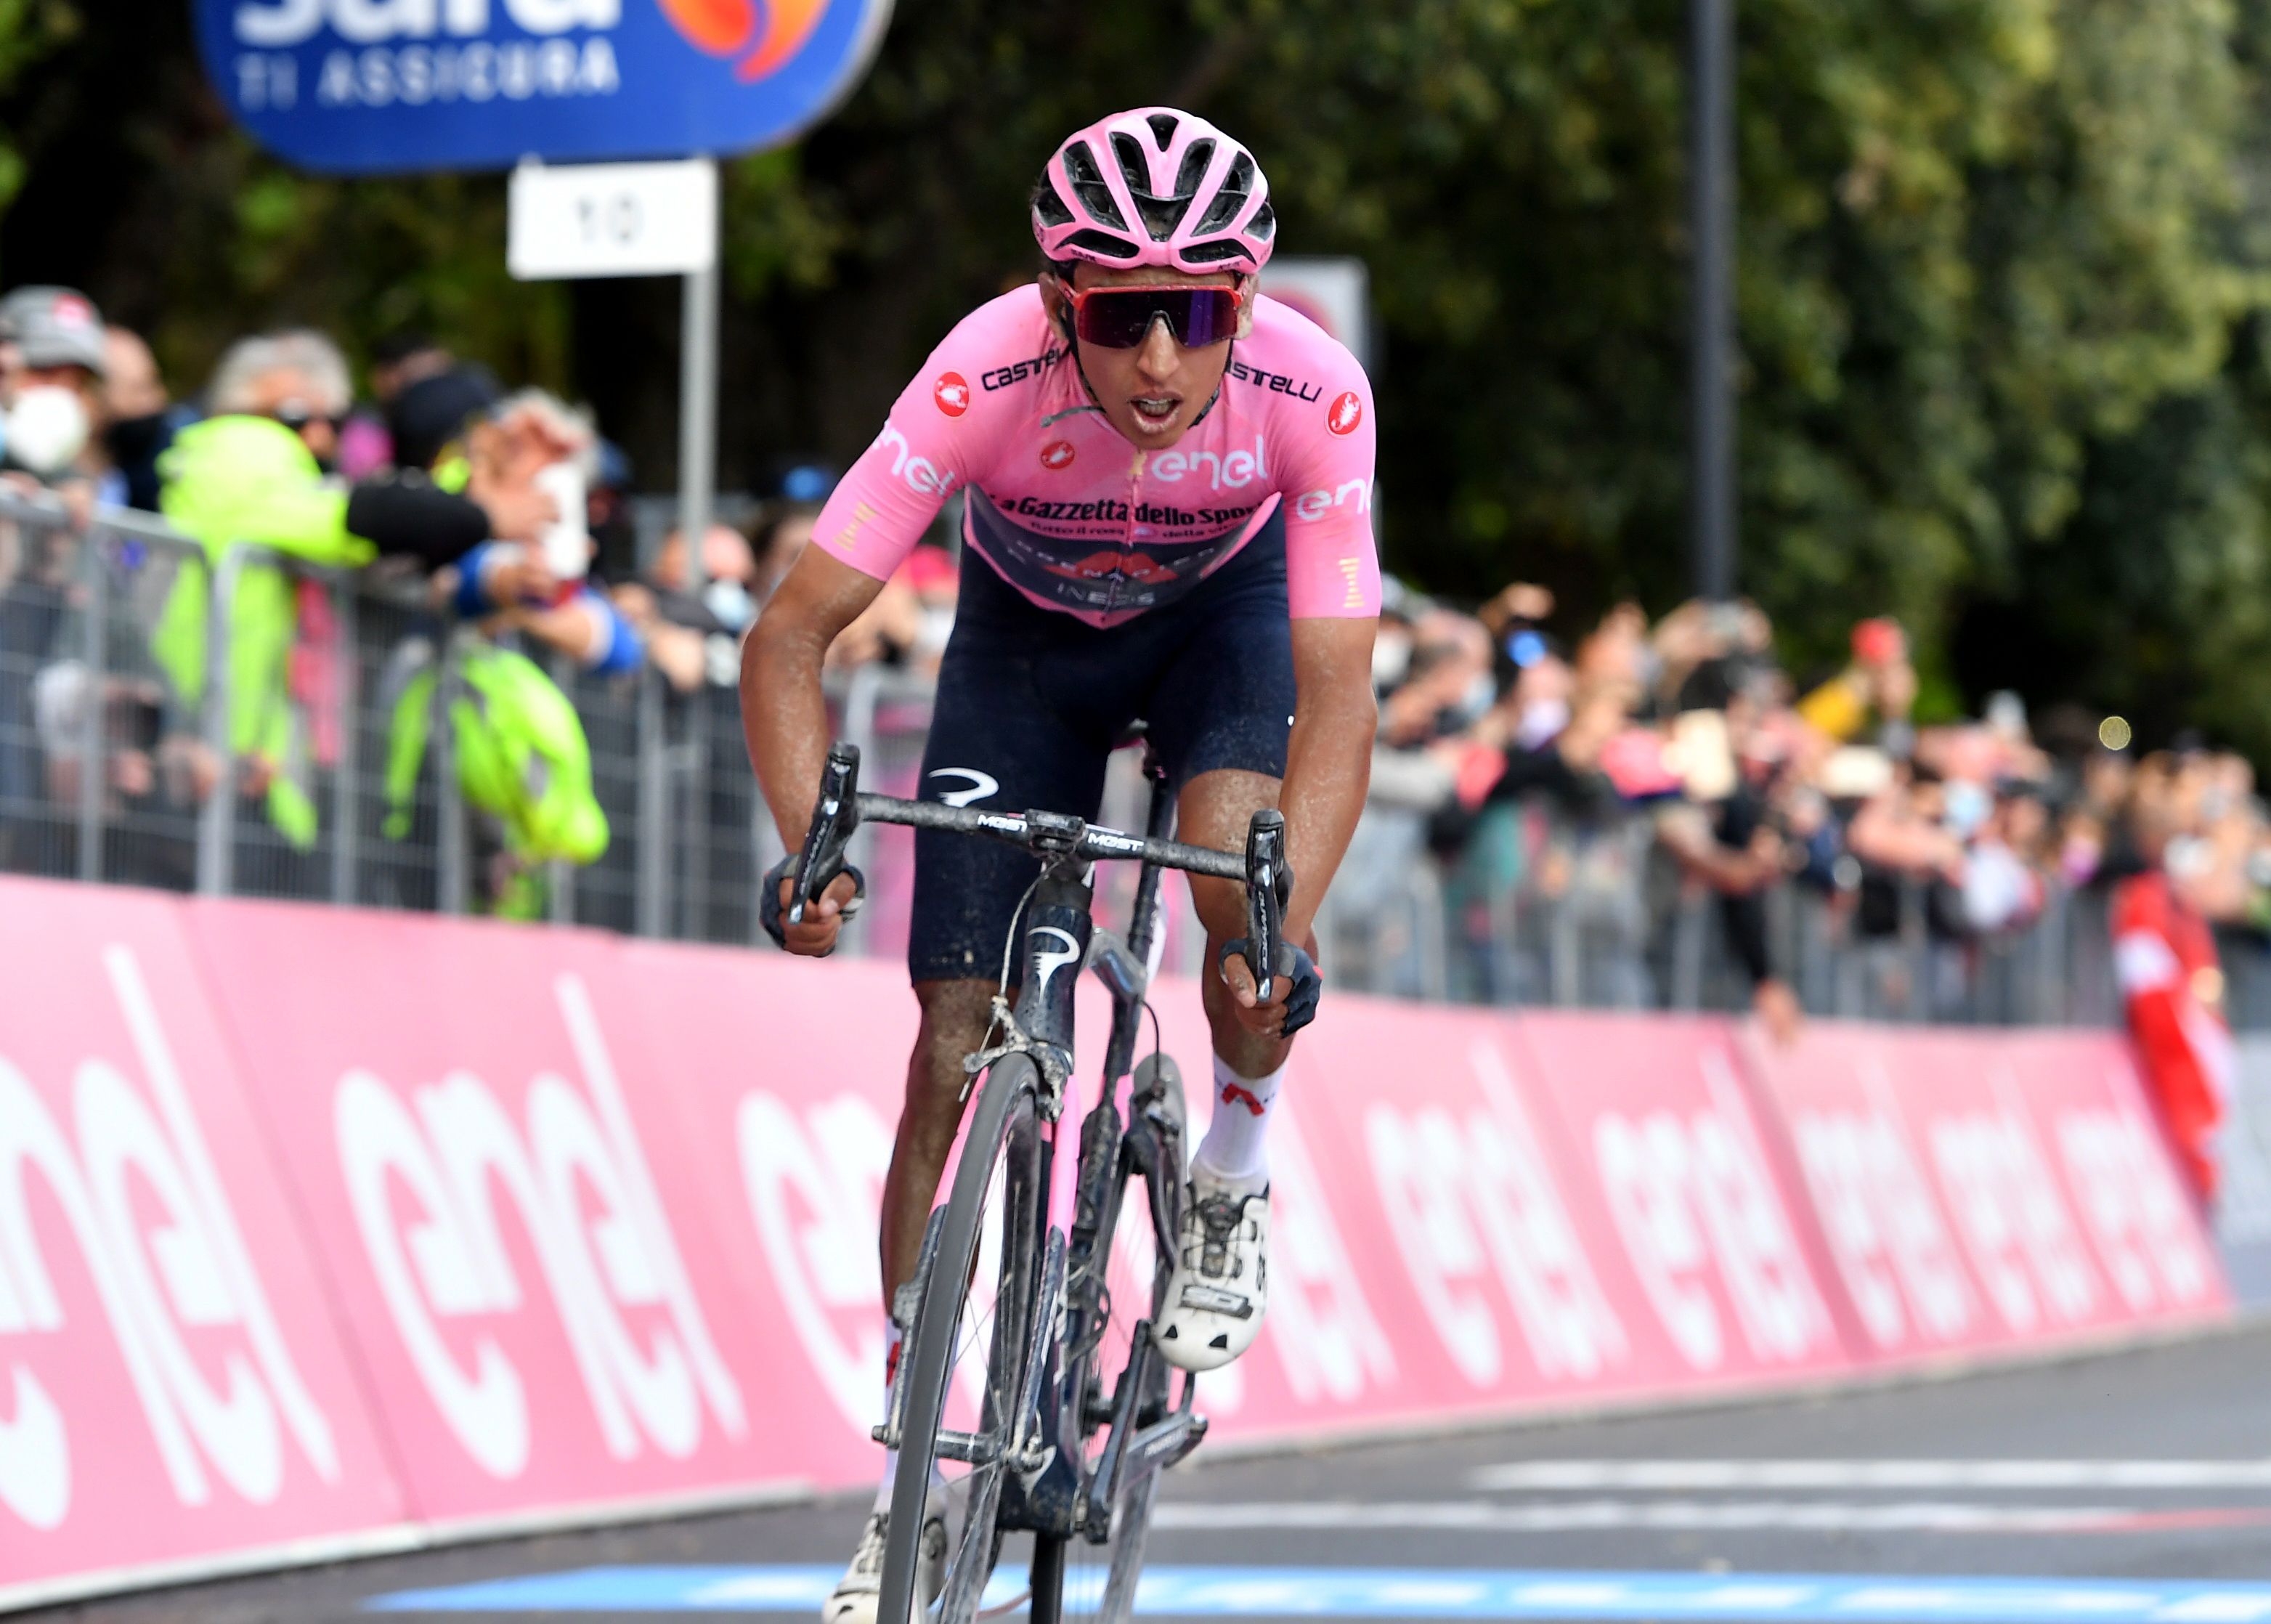 Cycling - Giro d'Italia - Stage 11 - Perugia to Montalcino (Brunello di Montalcino Wine Stage), Italy - May 19, 2021  Ineos Grenadiers rider Egan Arley Bernal Gomez of Colombia wearing the maglia rosa finishes stage 11 REUTERS/Jennifer Lorenzini